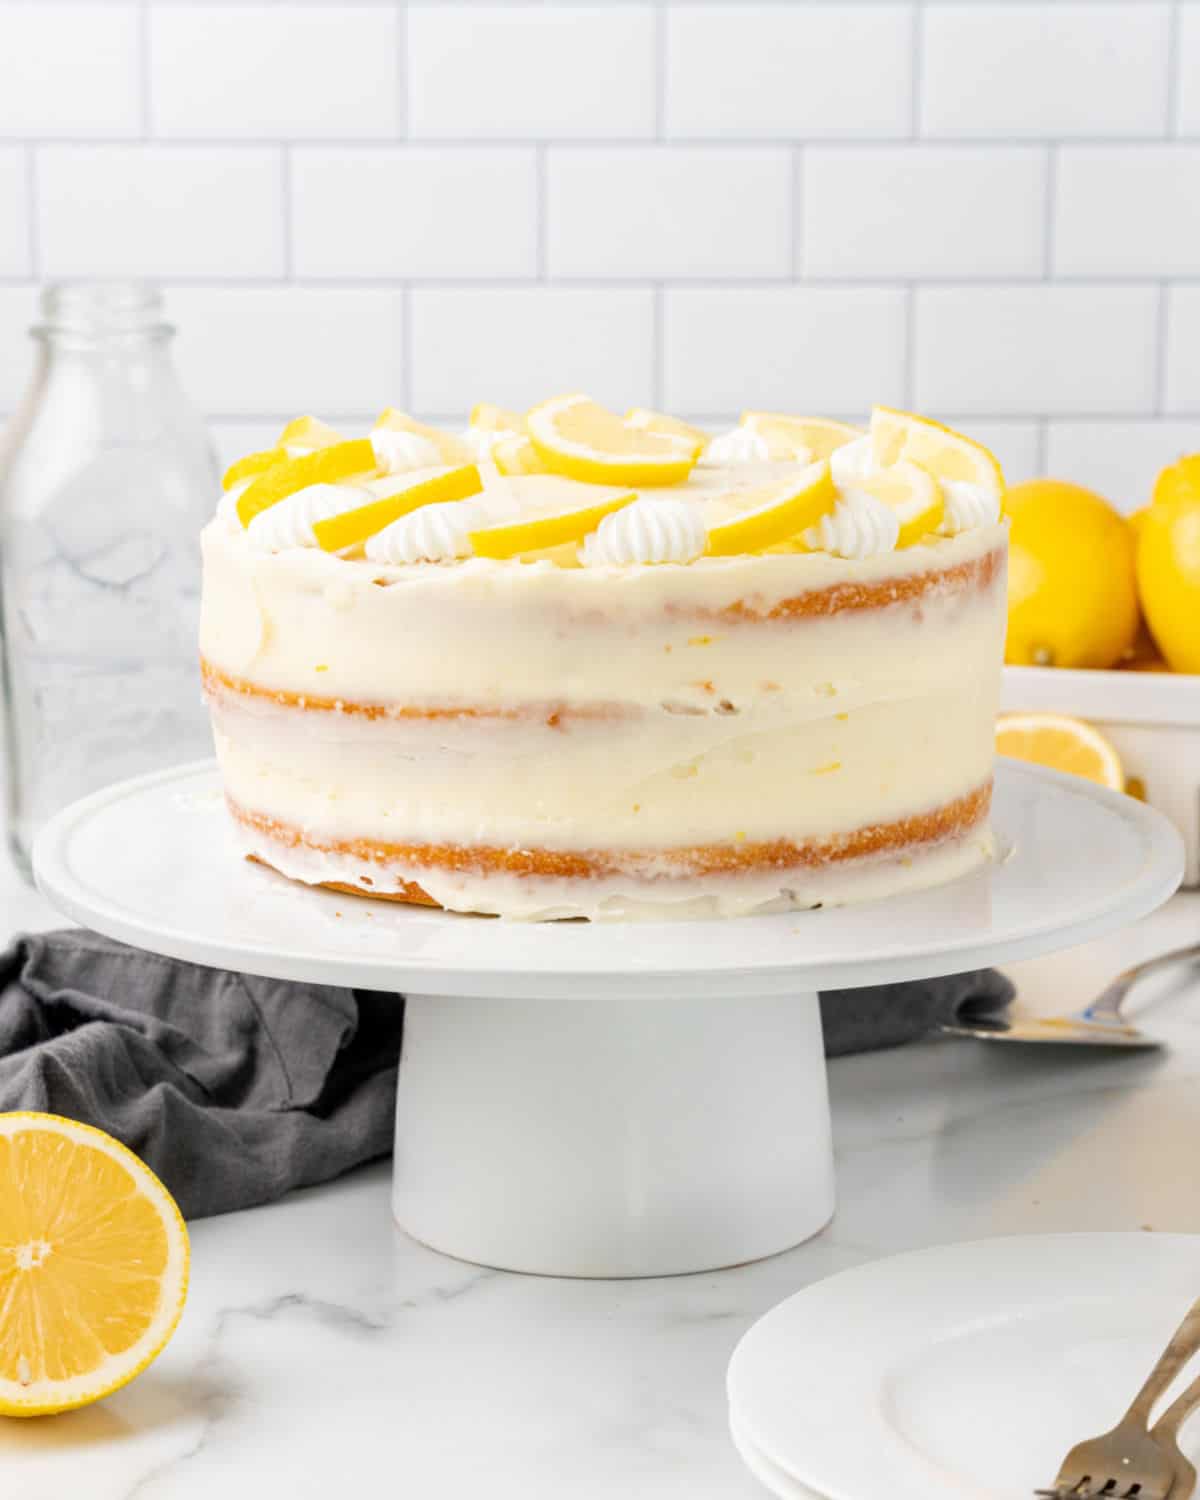 Lemon layer cake frosted and decorated on a white cake stand. White subway tiles as background.